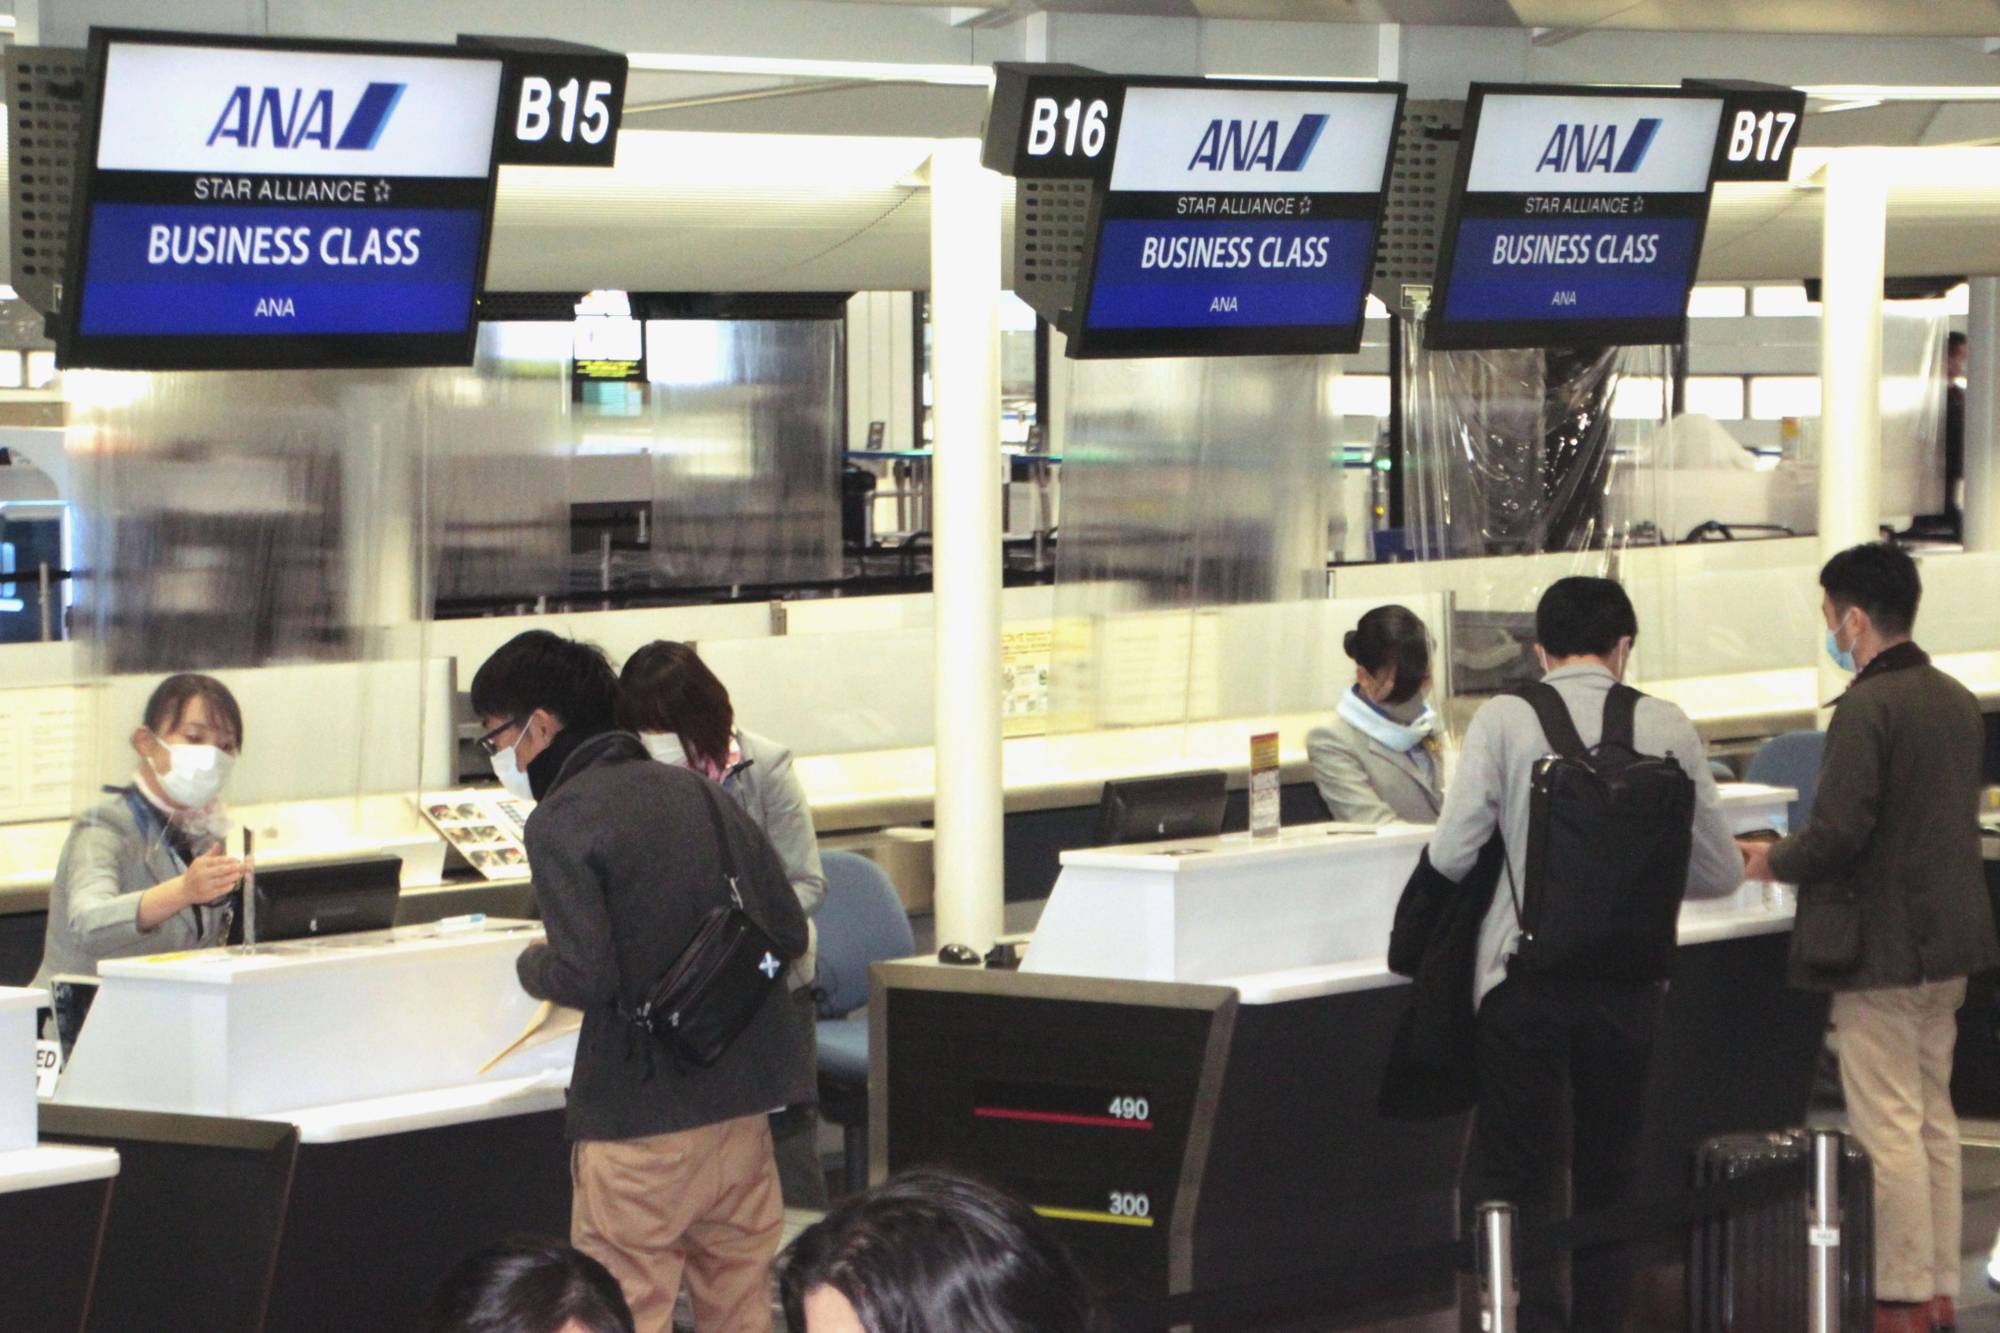 Passengers go through boarding procedures at an All Nippon Airways check-in counter for the airline's inaugural flight to Shenzhen at Narita Airport in Chiba Prefecture on Monday. | KYODO